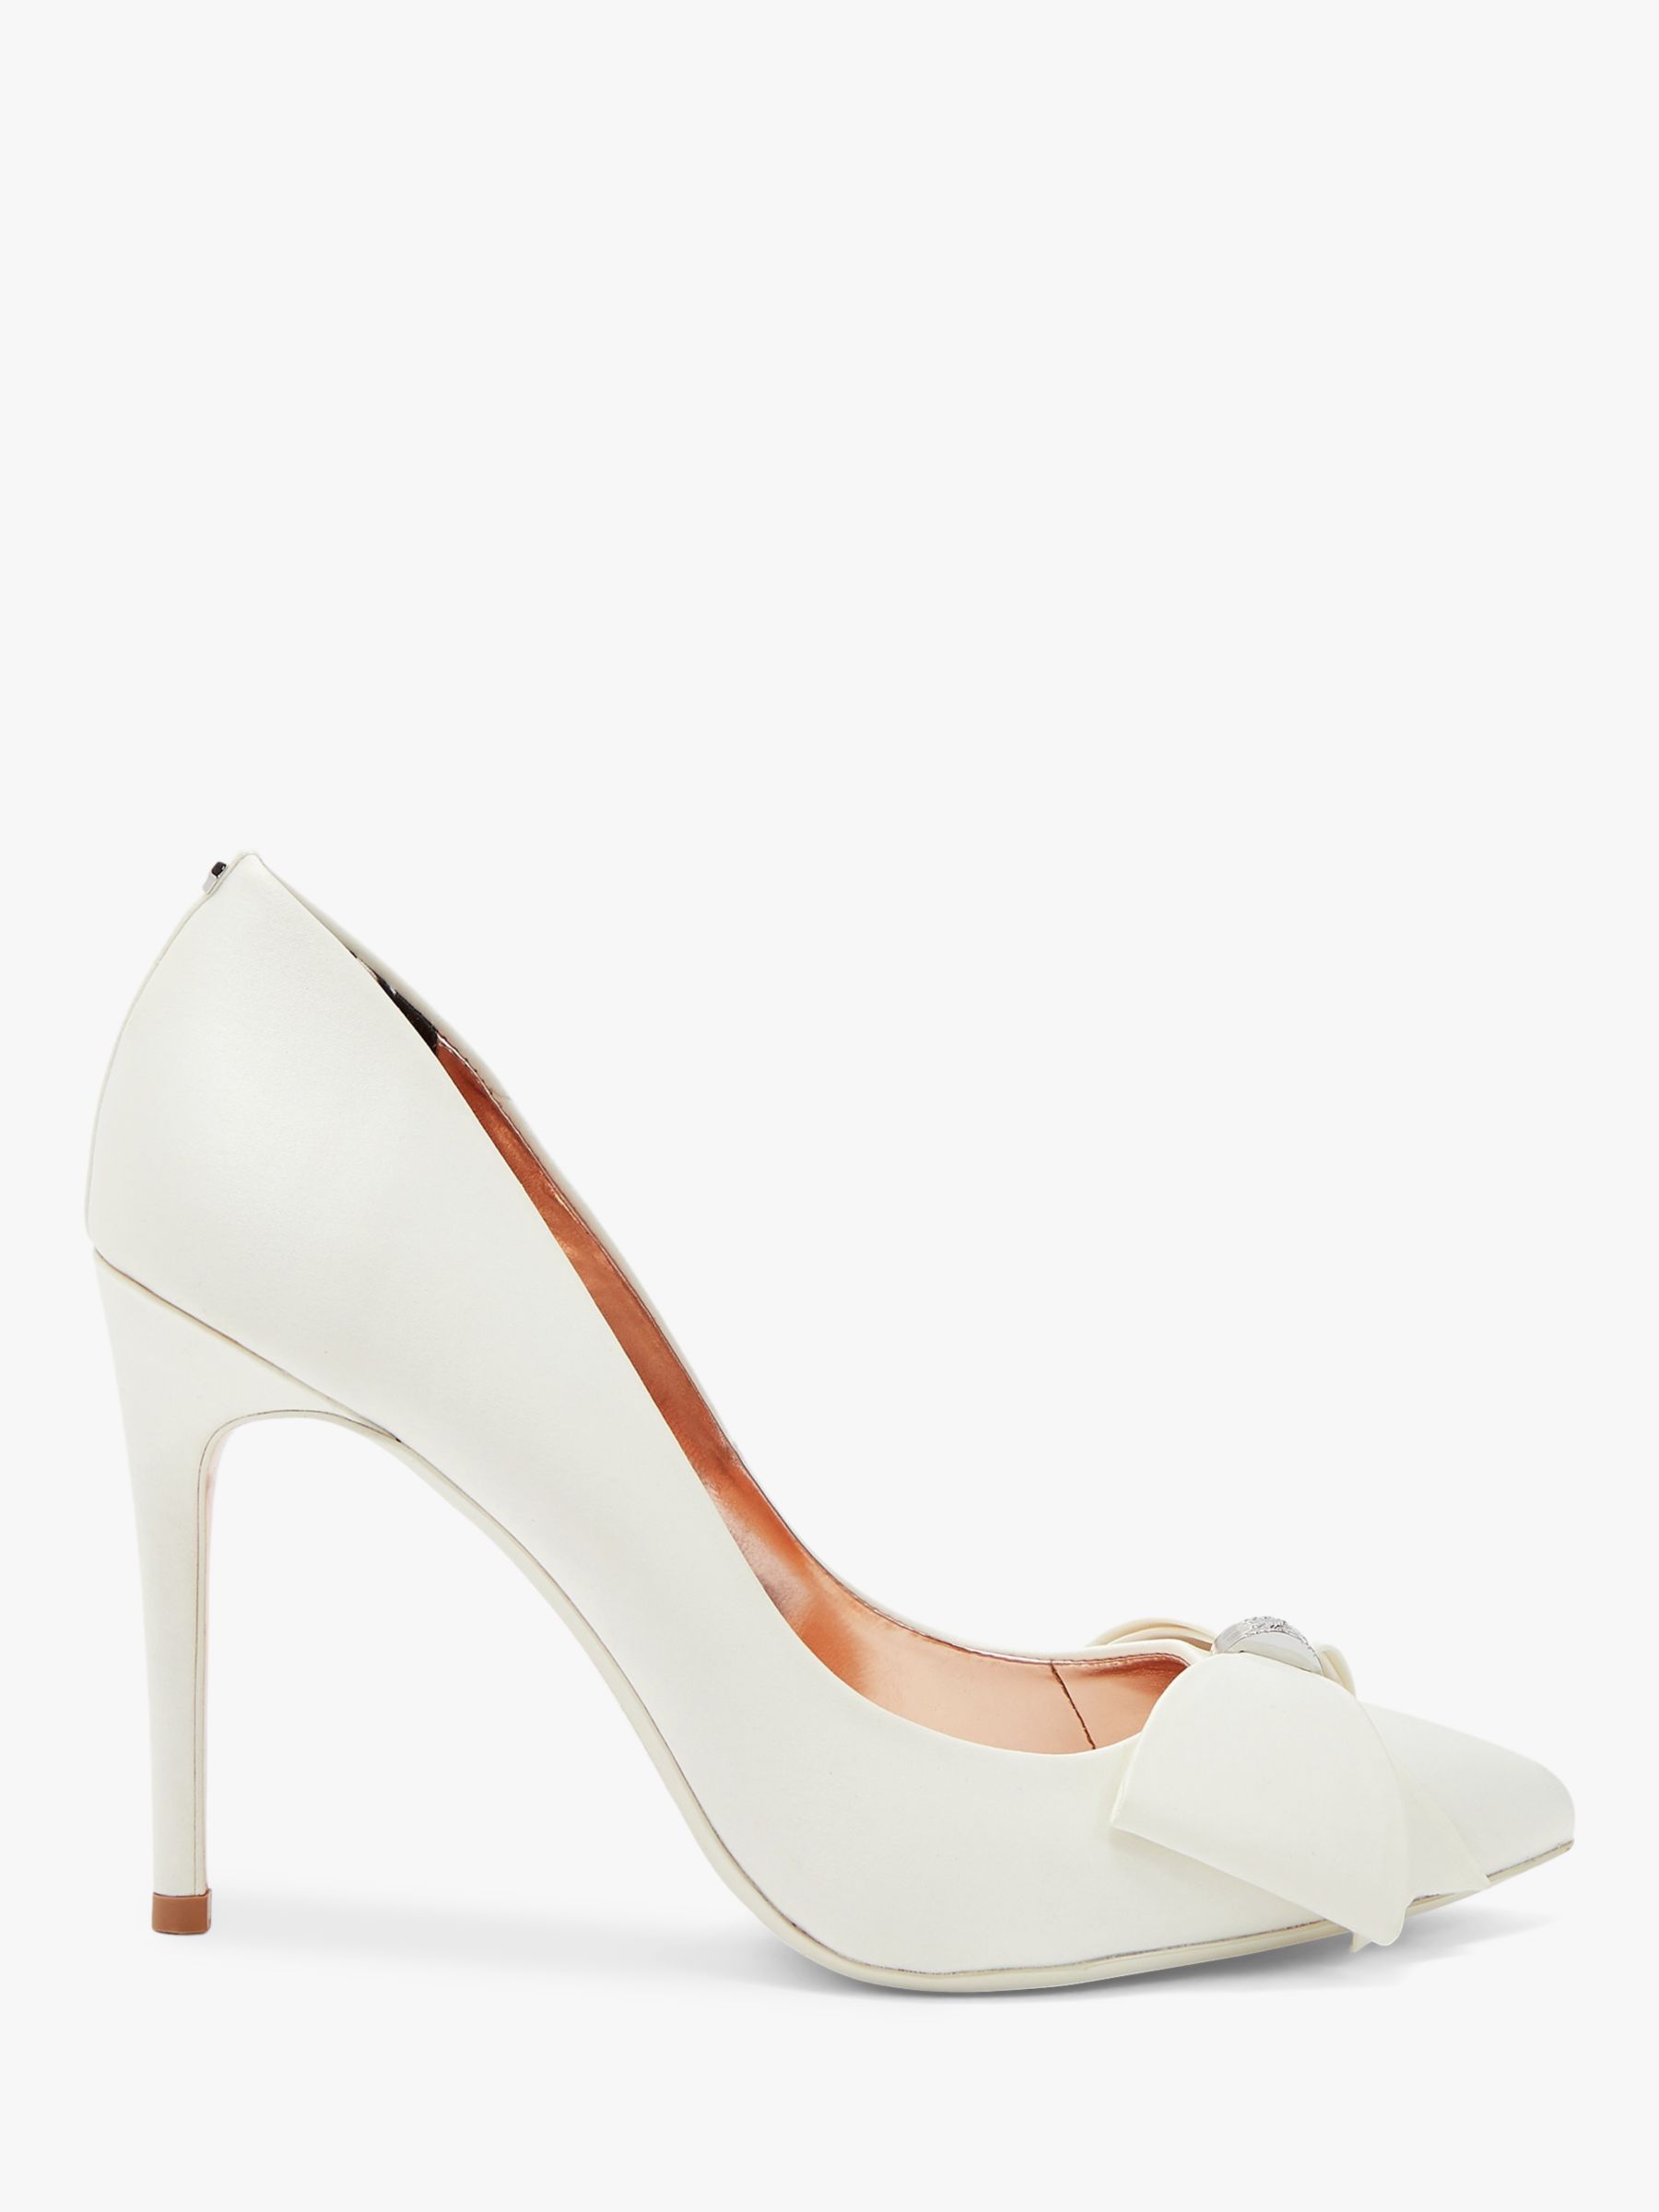 Ted Baker Asellys Stiletto Heel Bow Detail Court Shoes, Ivory